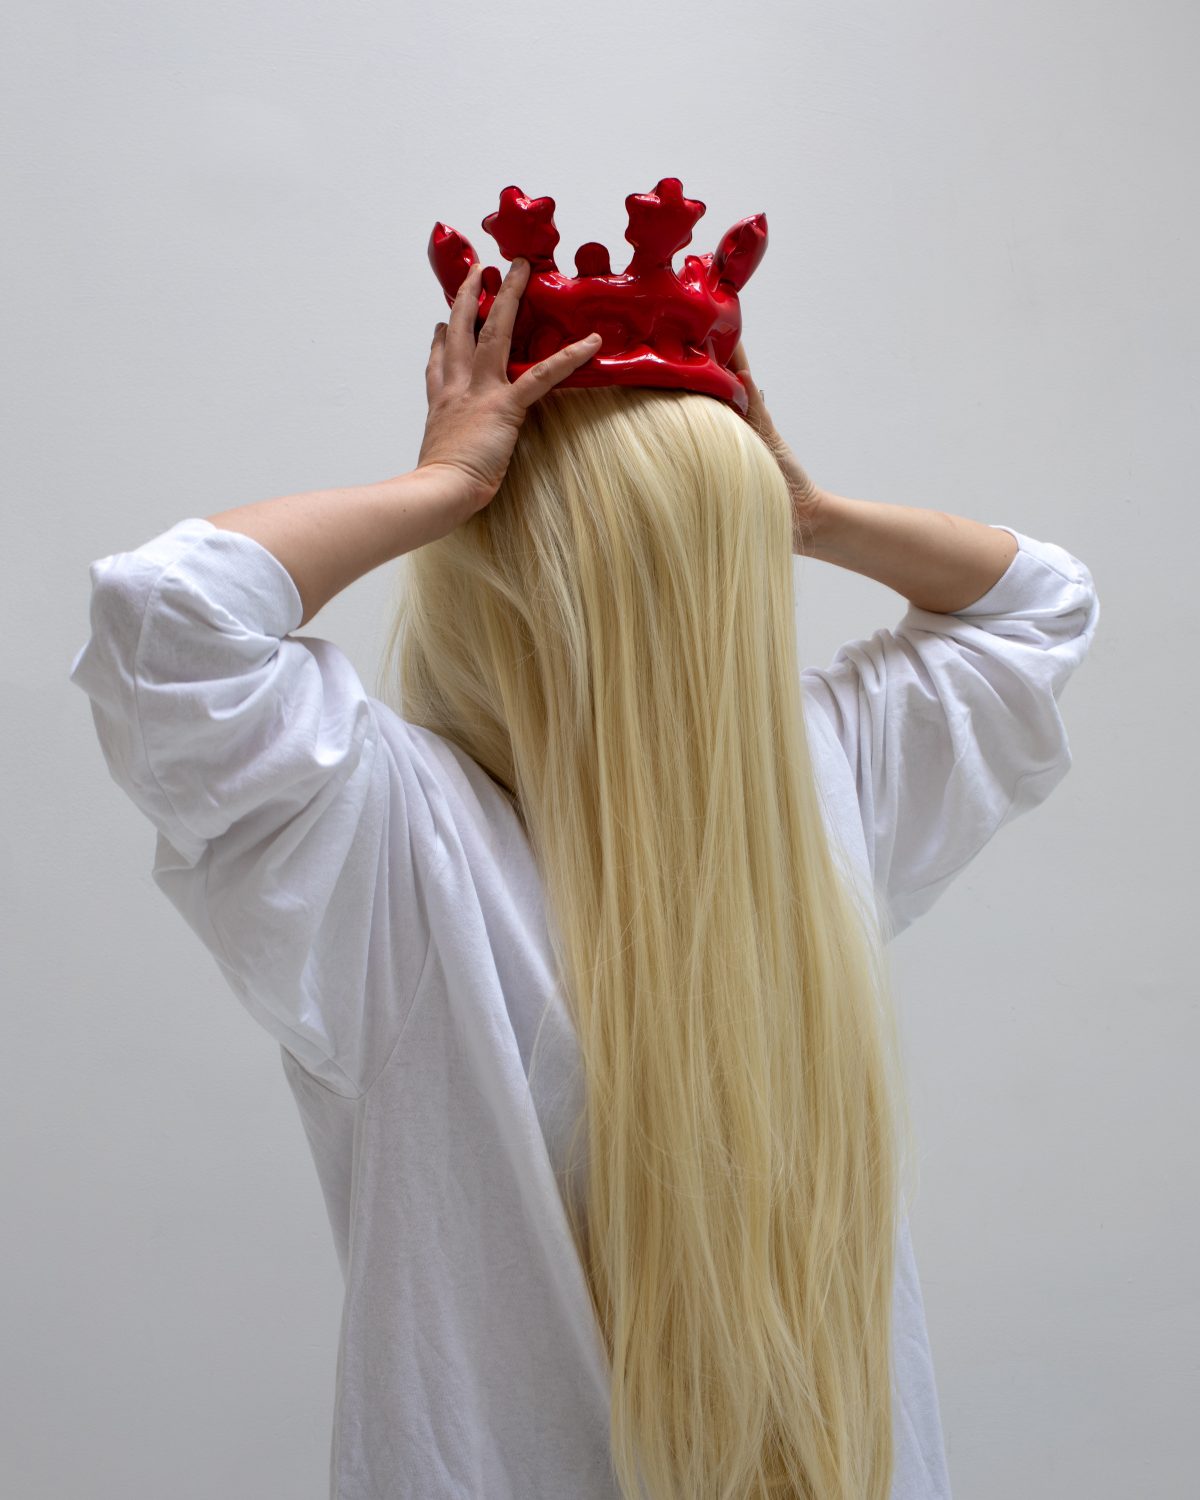 Woman holding red crown.